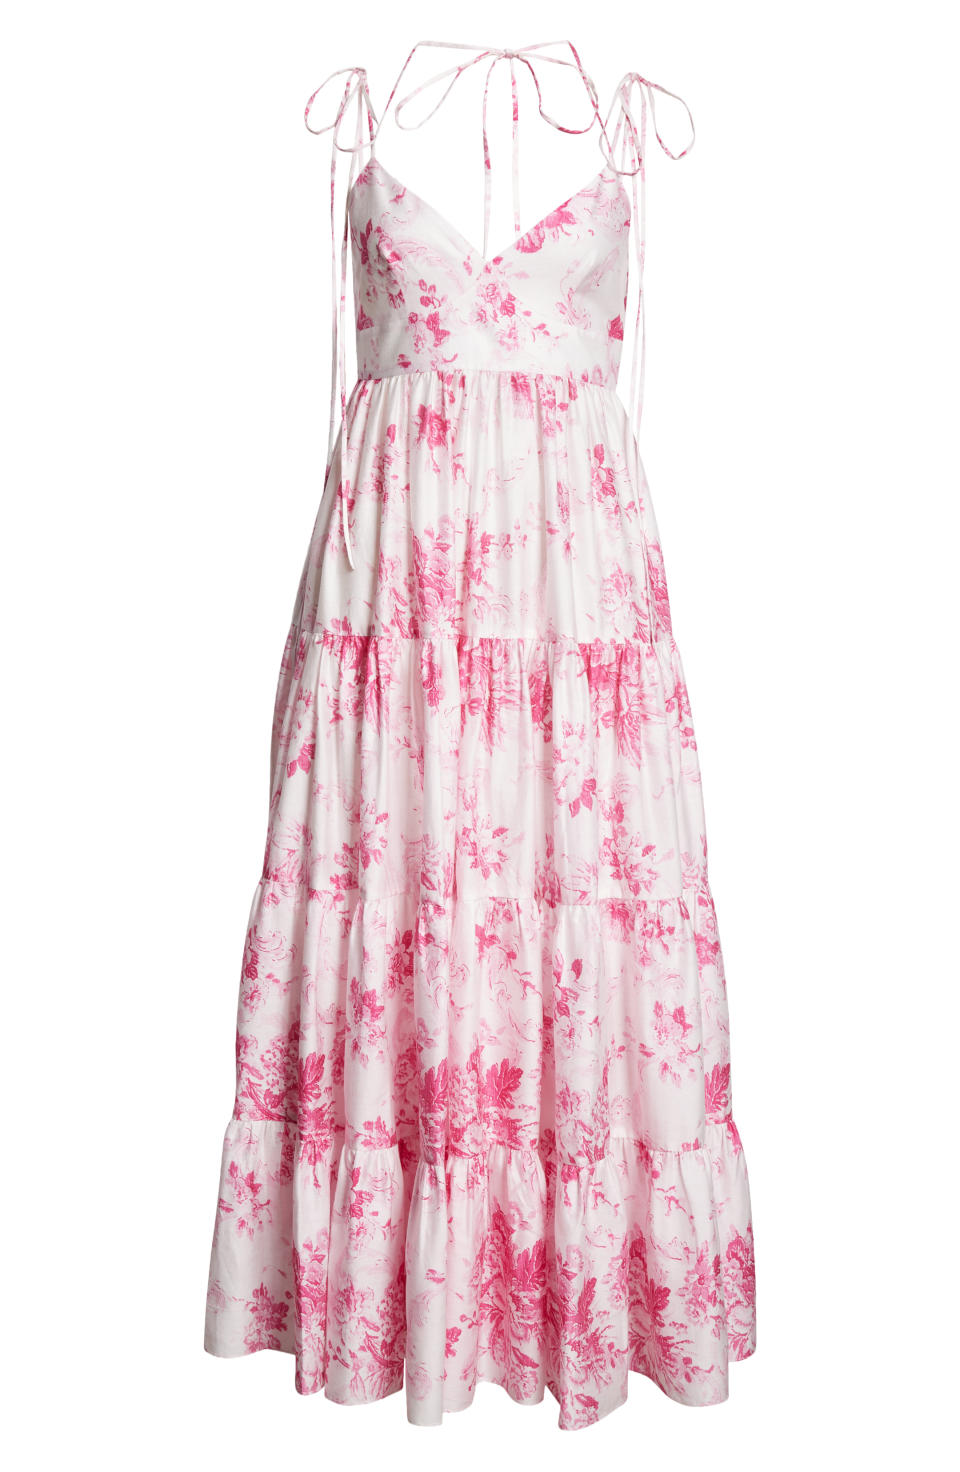 Erdem's floral print strappy tiered dress.  